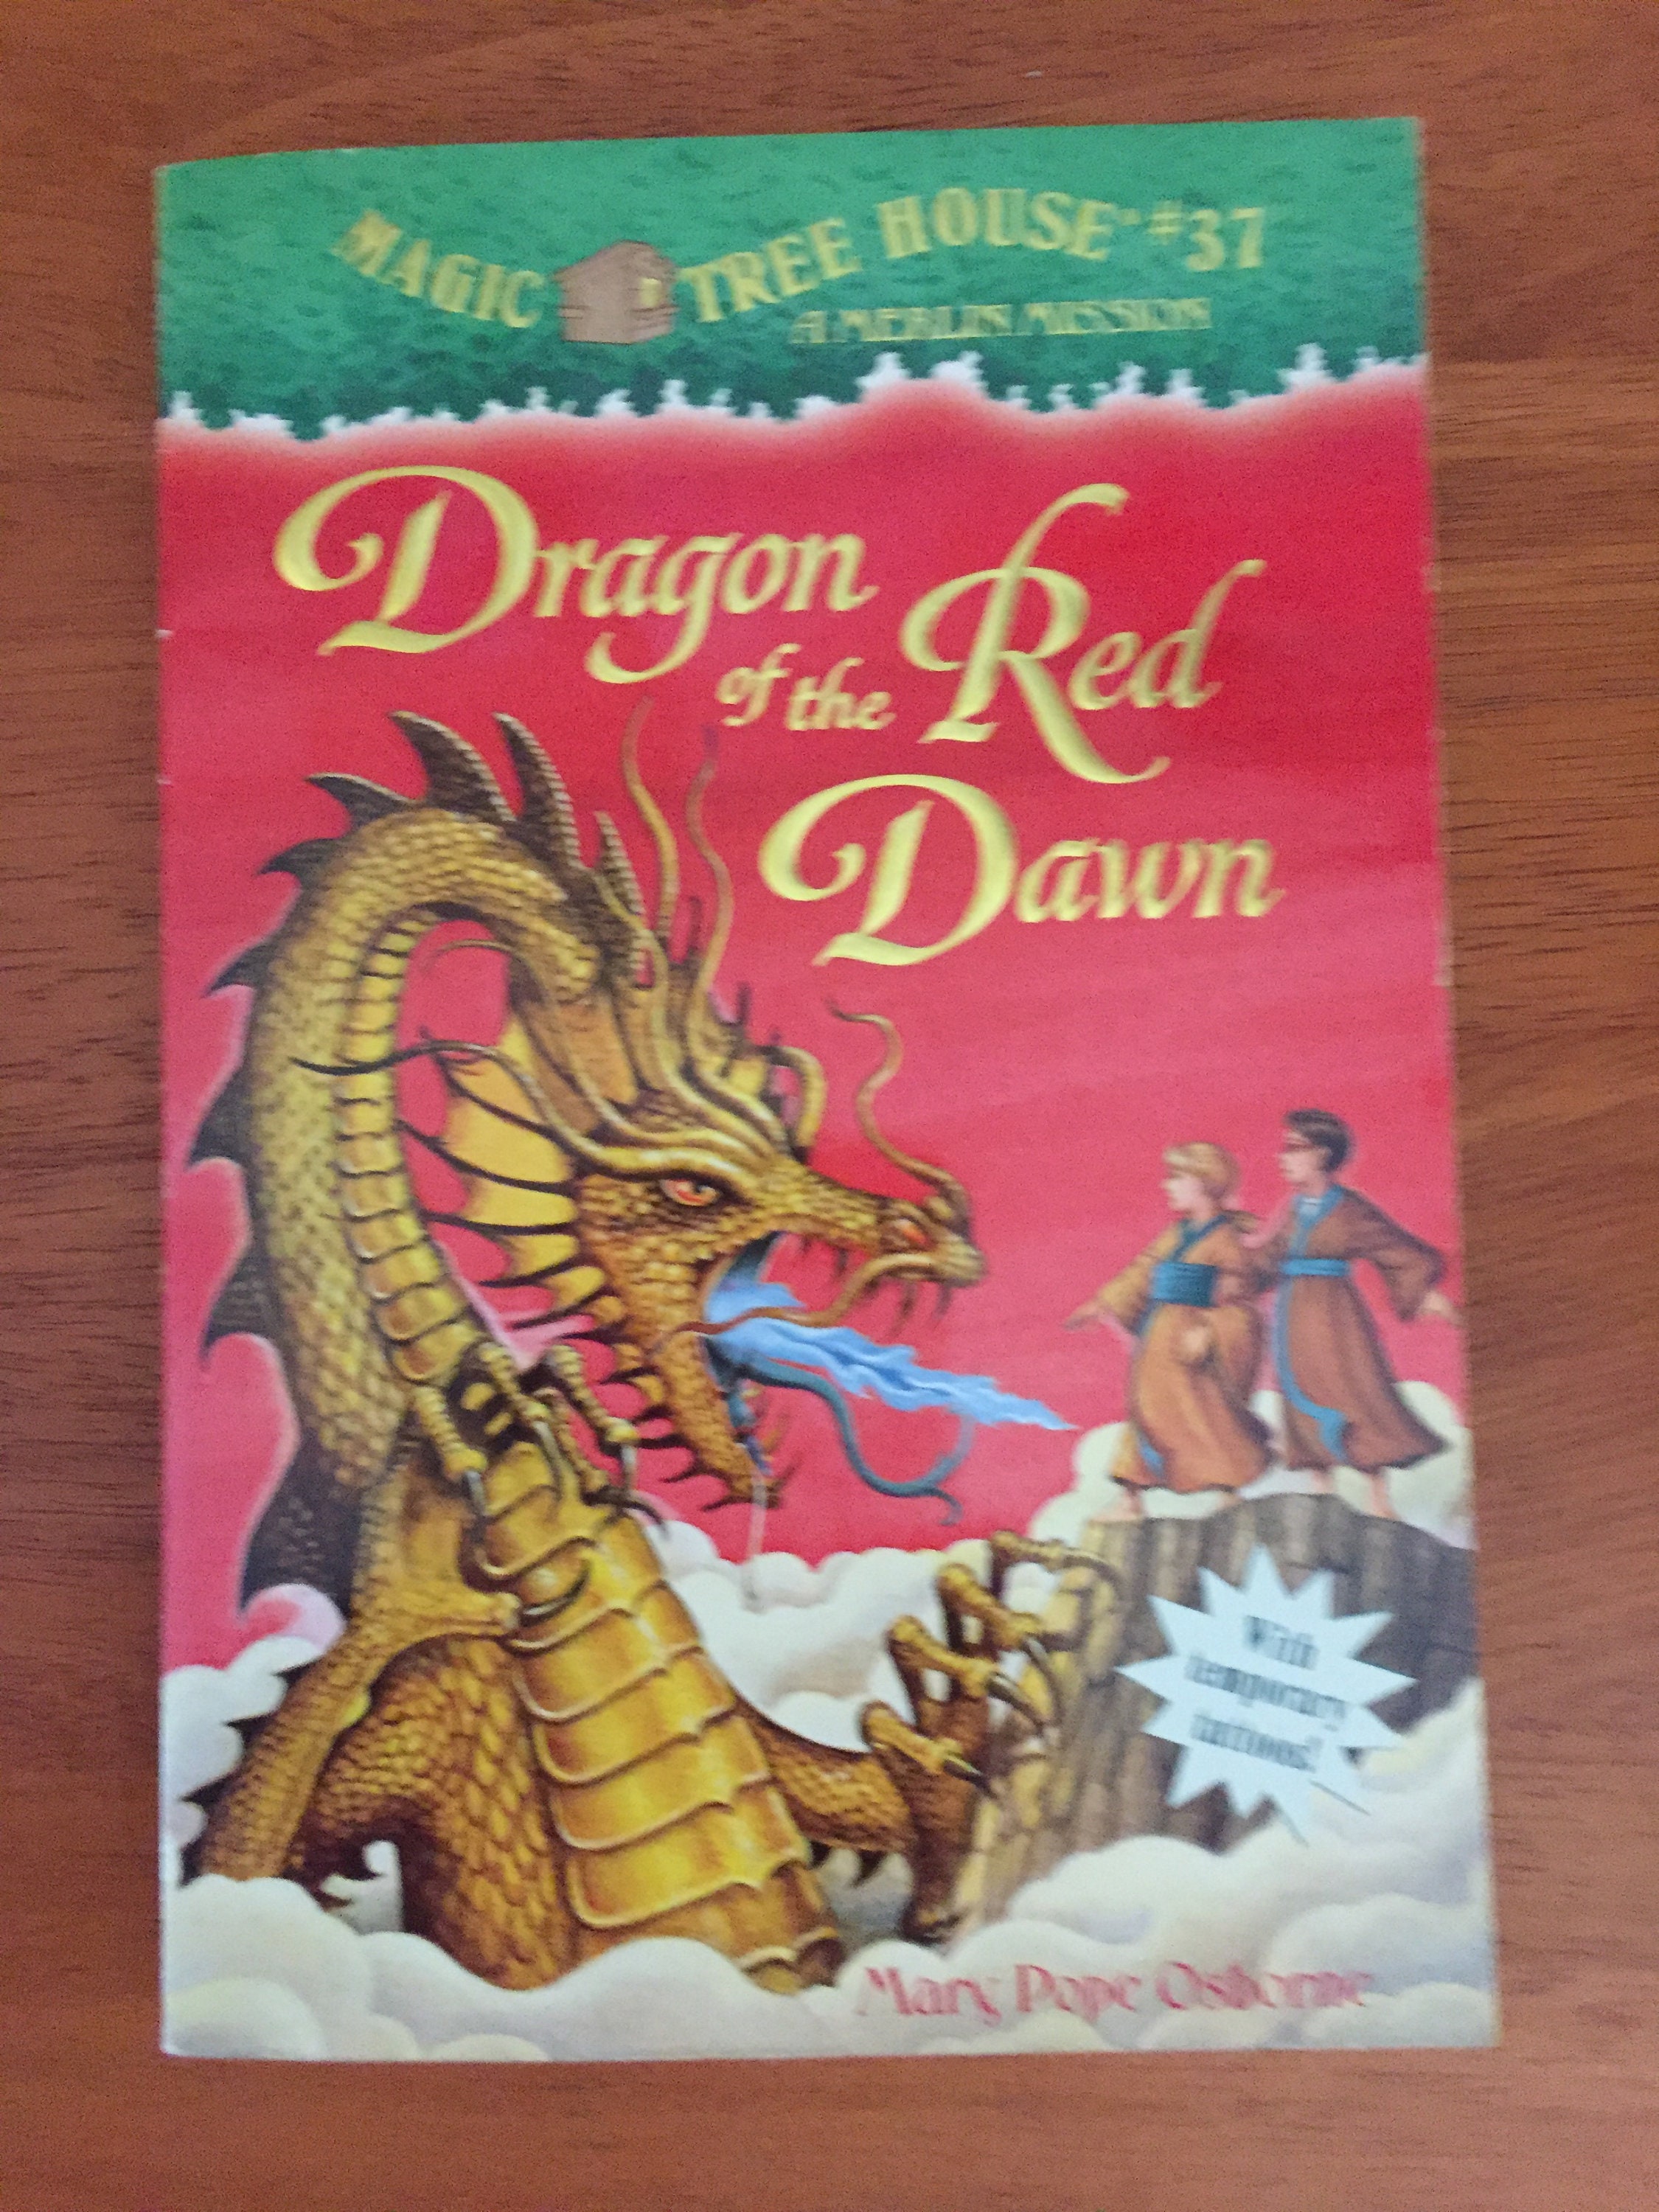 Forbyde influenza interval Magic Tree House 37 Dragon of the Red Dawn - Etsy